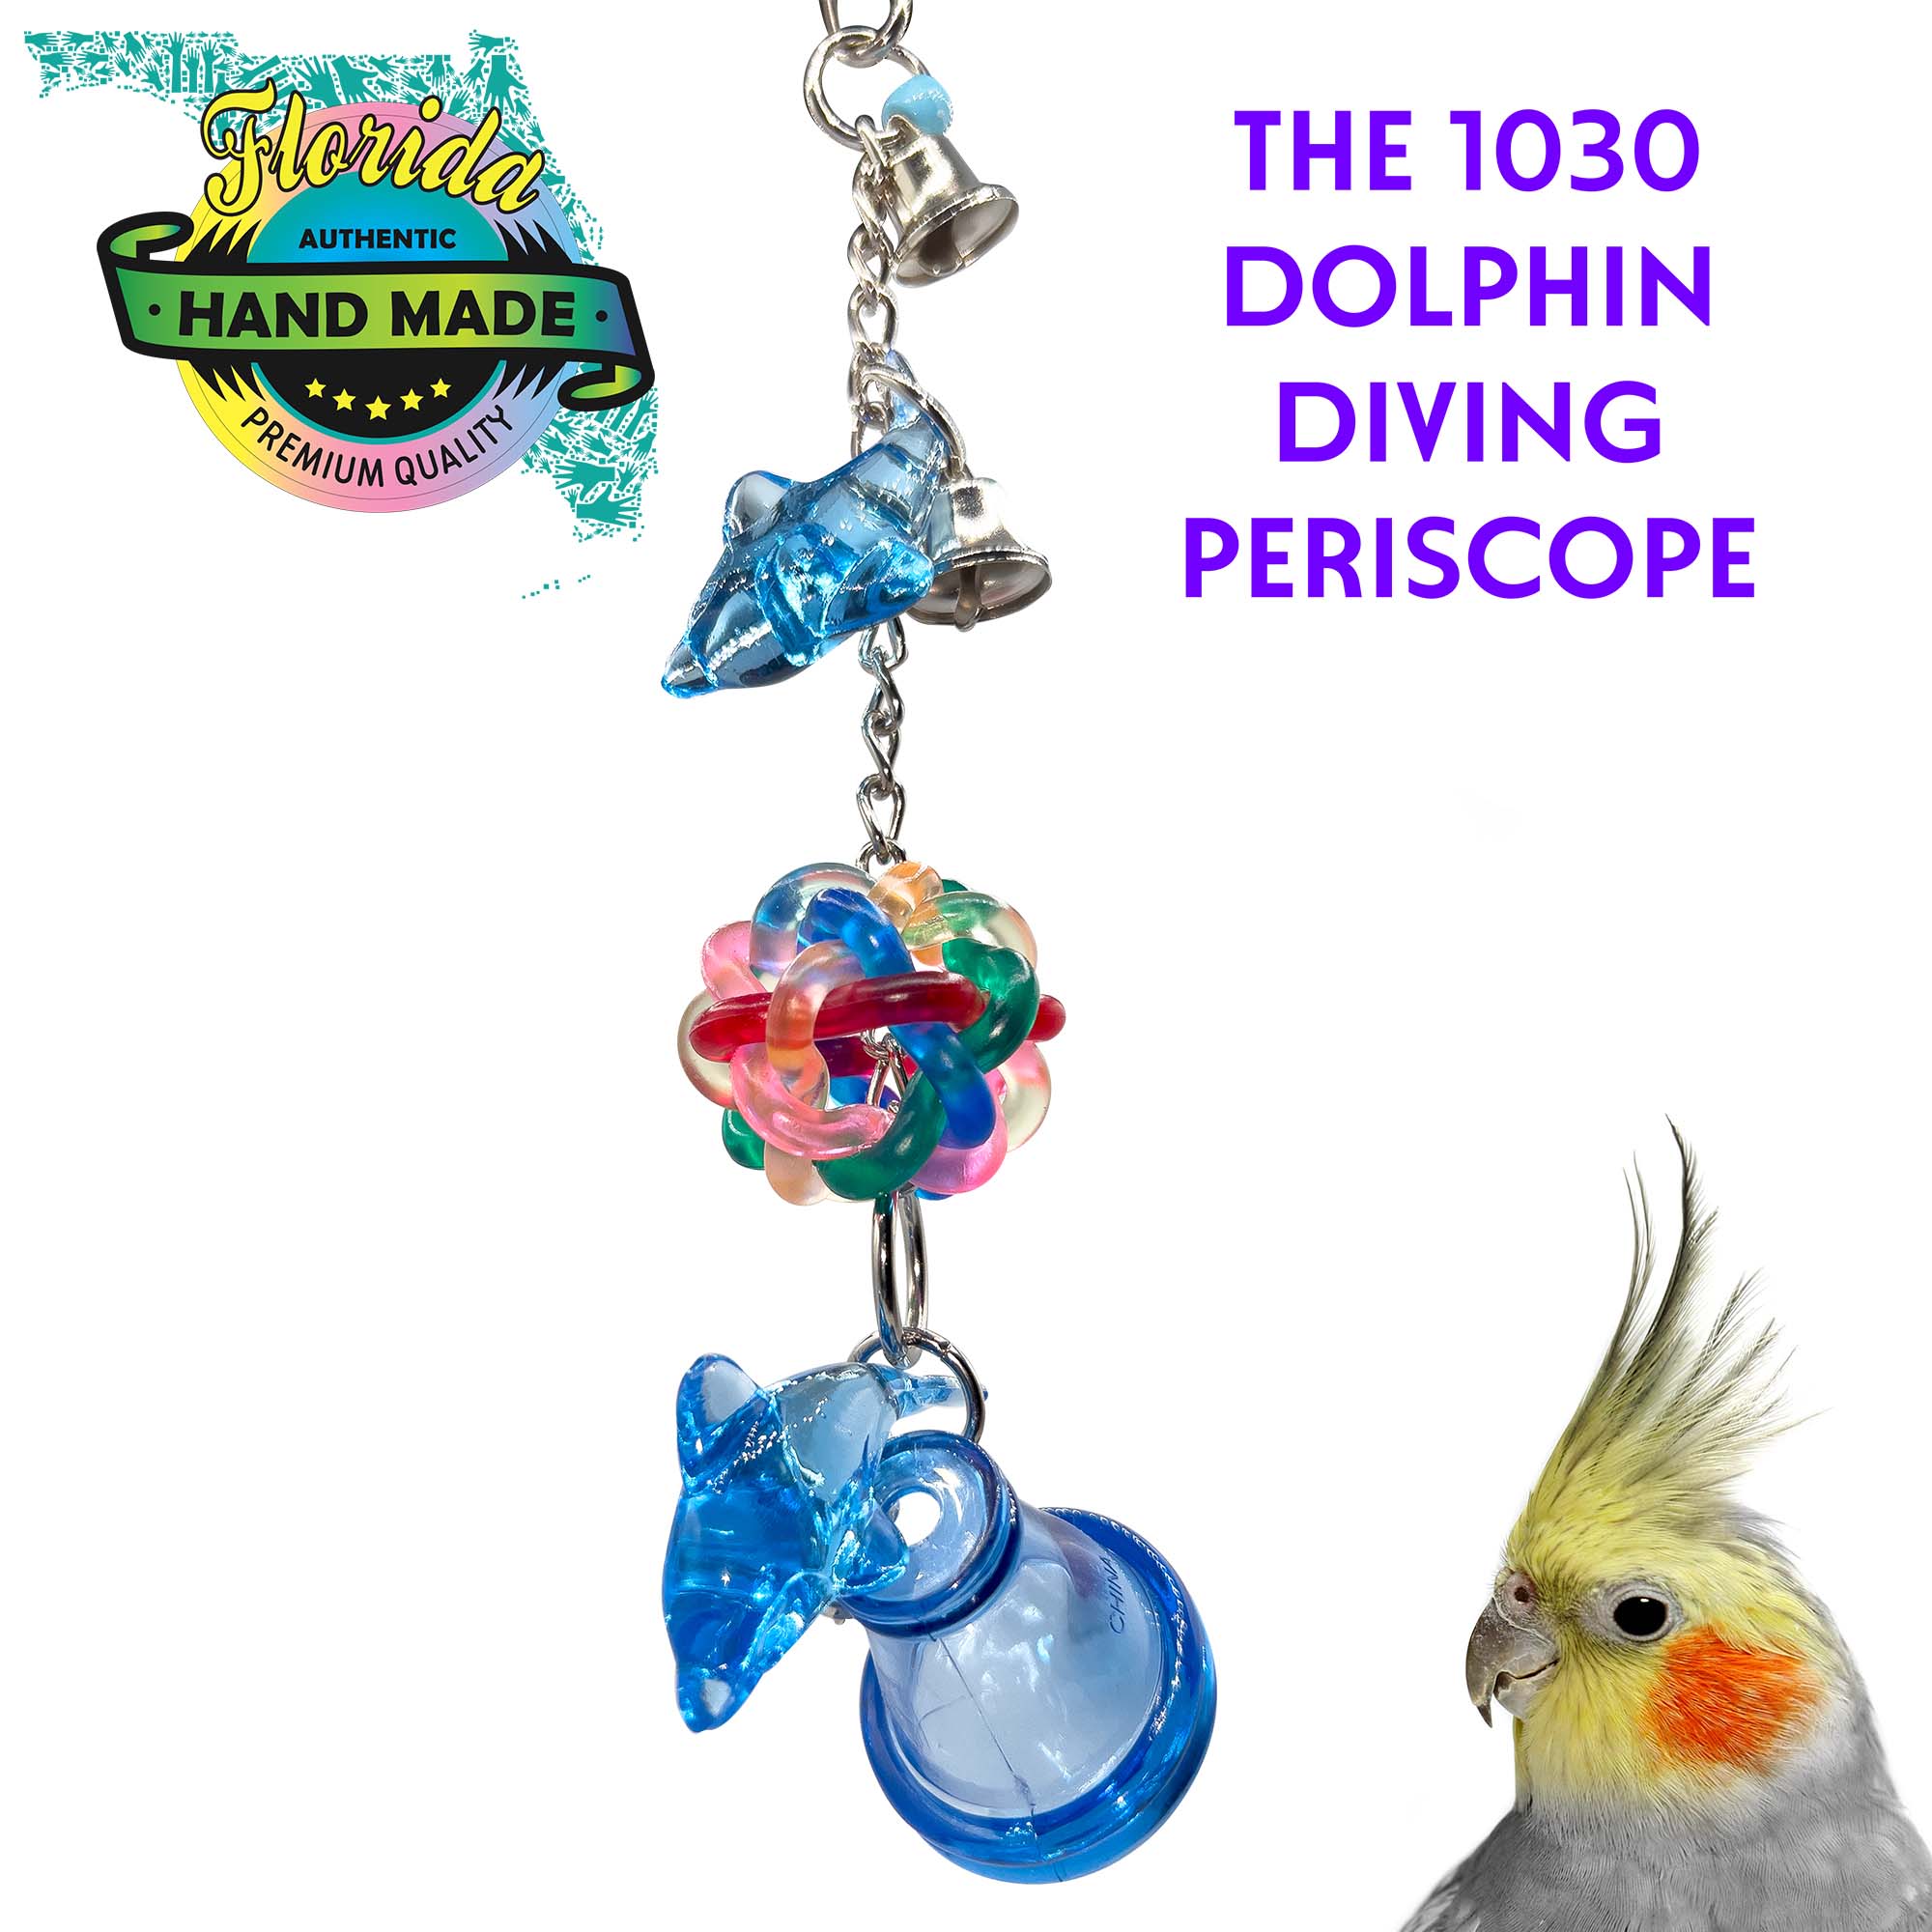 1030 Dolphin Diving Periscope